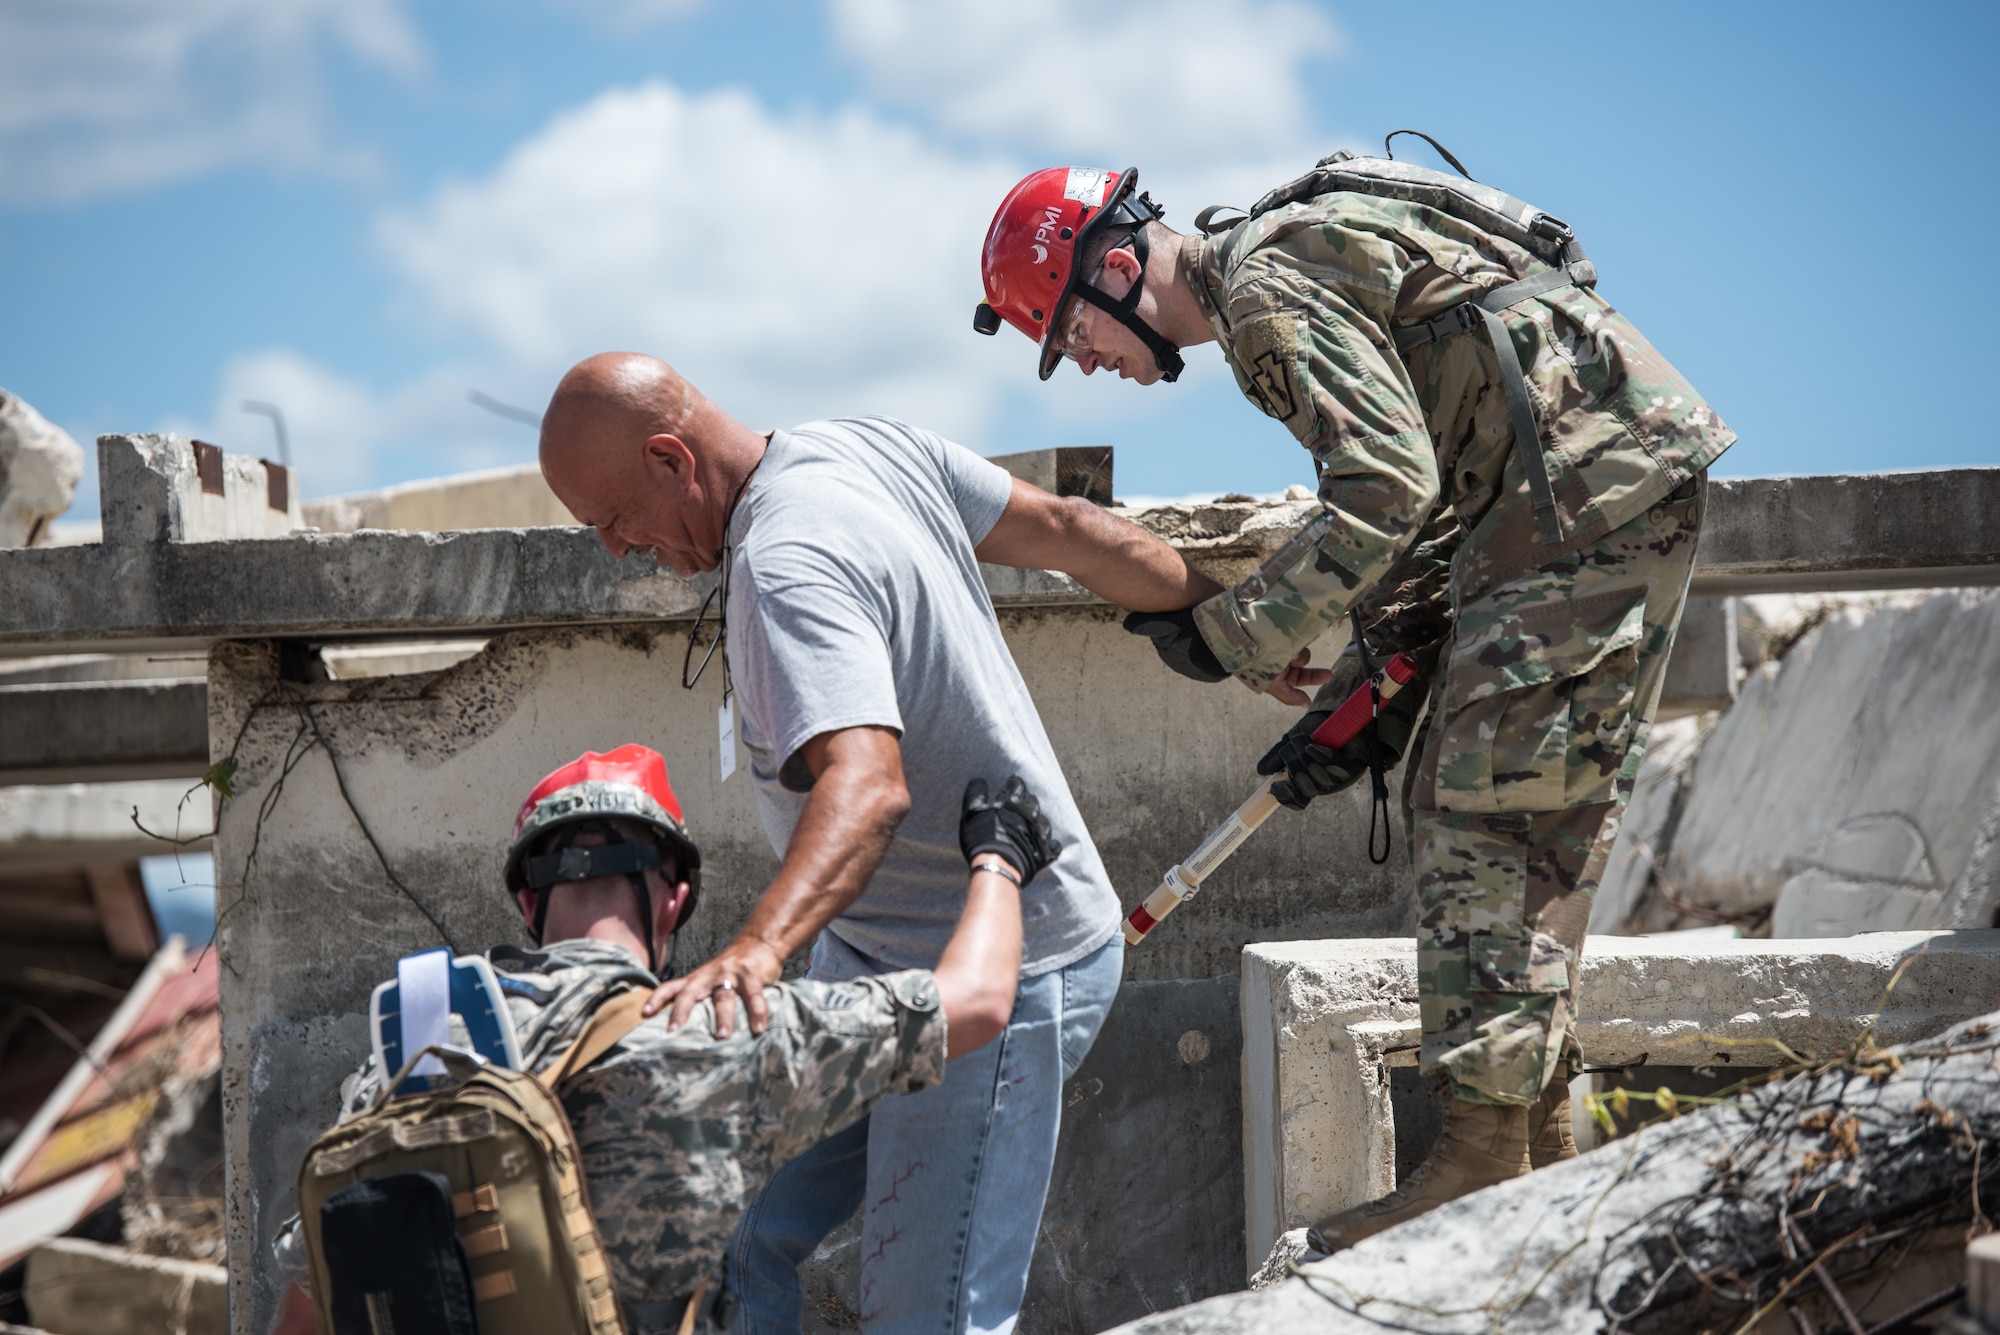 A U.S. Airman and Soldier from the 3rd Chemical, Biological, Radiological, Nuclear Task Force  search and extraction team, Pennsylvania National Guard, help a casualty actor descend down from a rubble pile during the exercise Vigilant Guard.